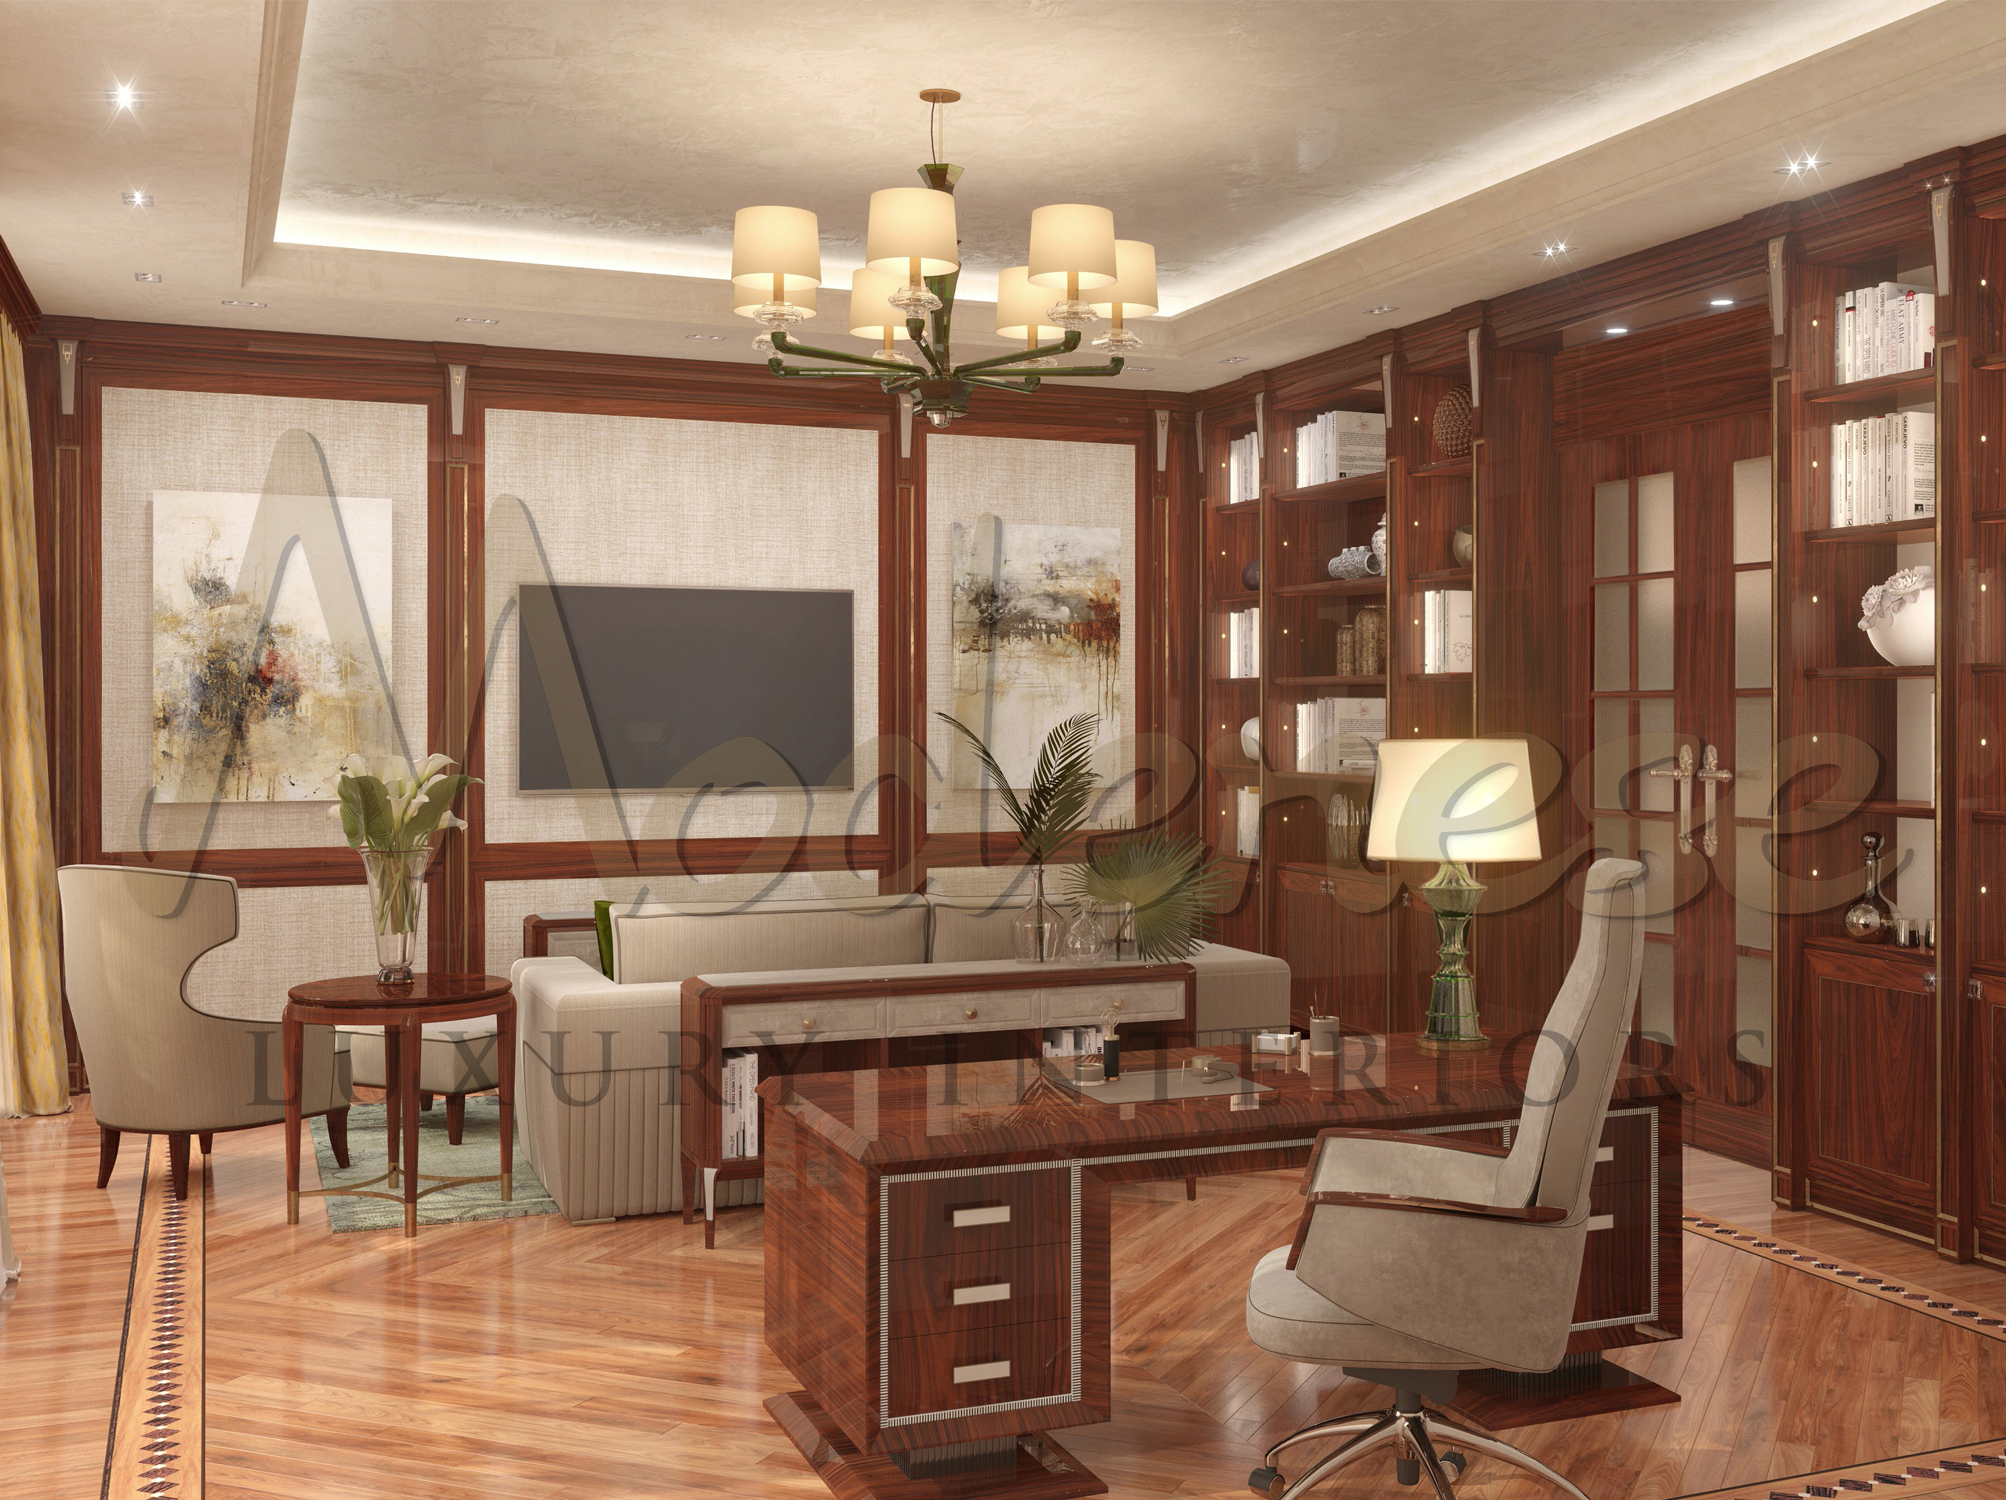 Best design of custom-made designer furniture, elegant classic style office. Solid wood joinery and Italian furniture production. Best Interior Design Studio In New York